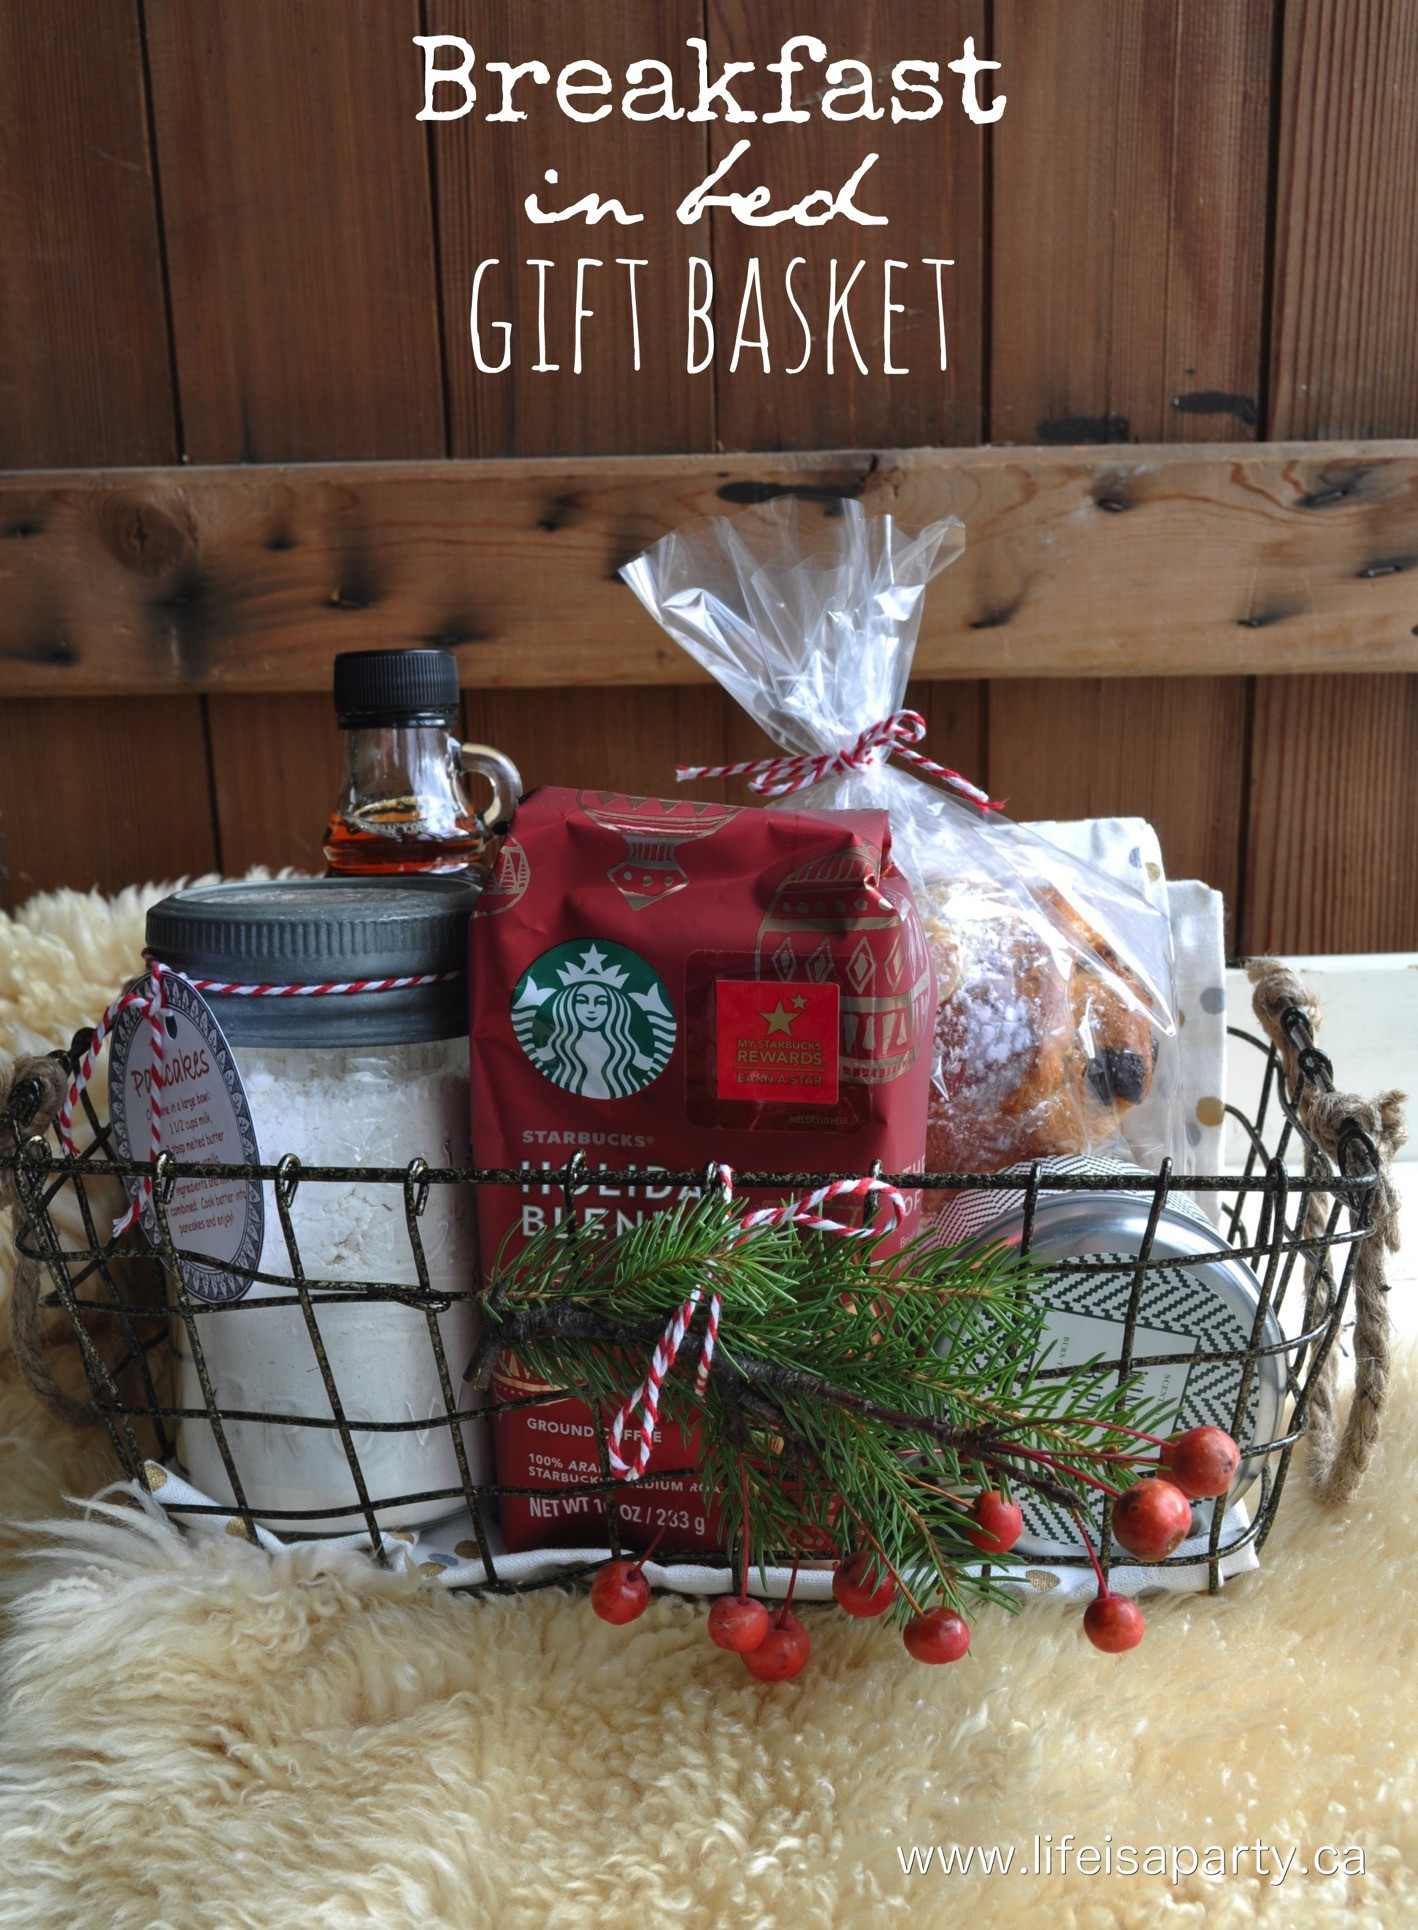 Christmas Gift Basket Ideas Pinterest
 Breakfast in Bed Gift Basket Life is a Party